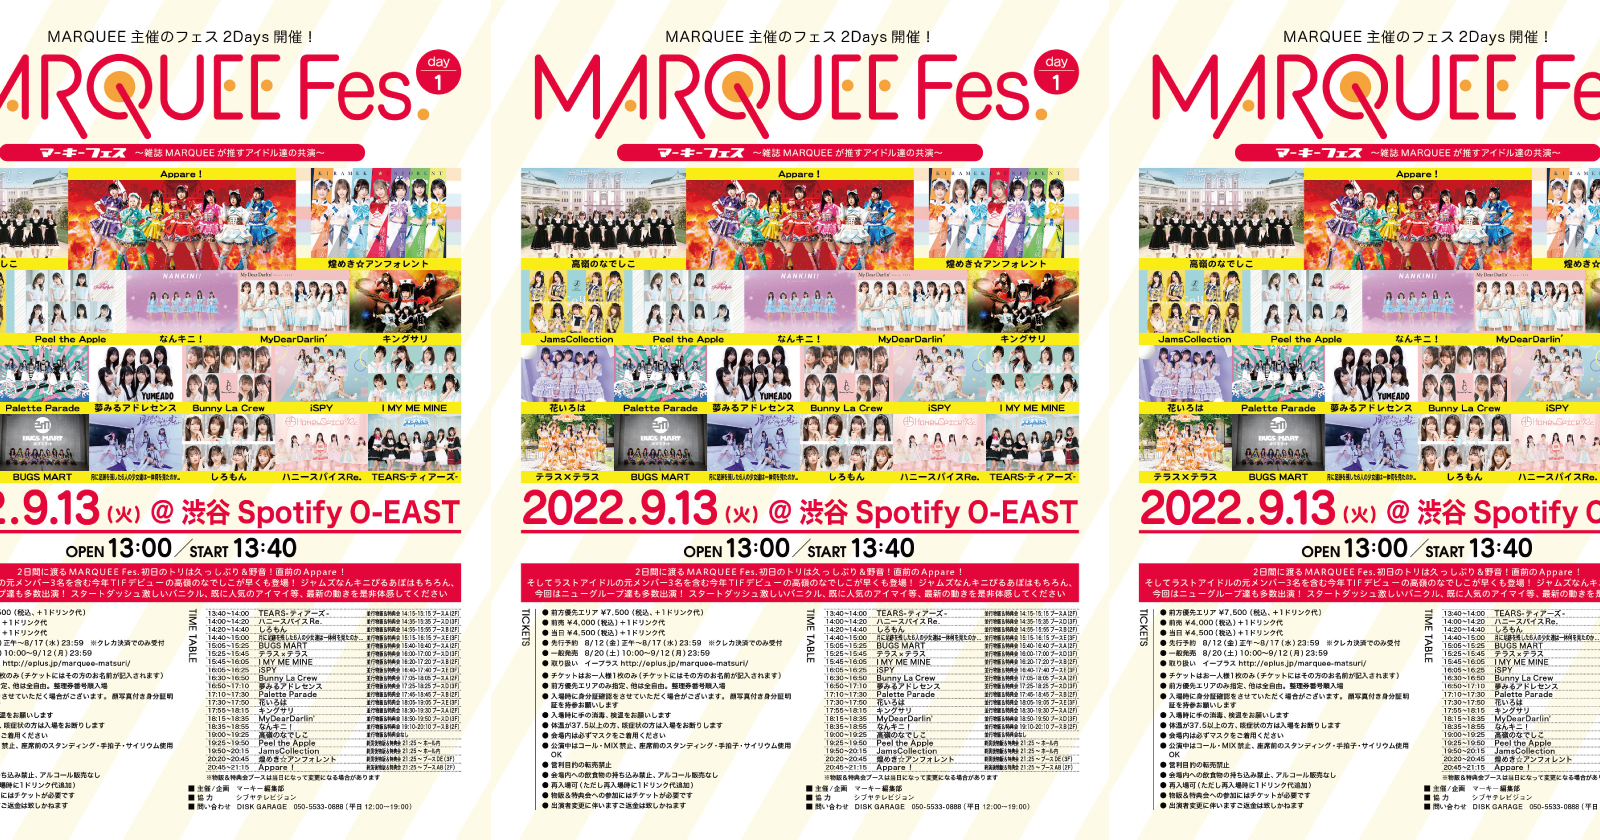 MARQUEE Fes.